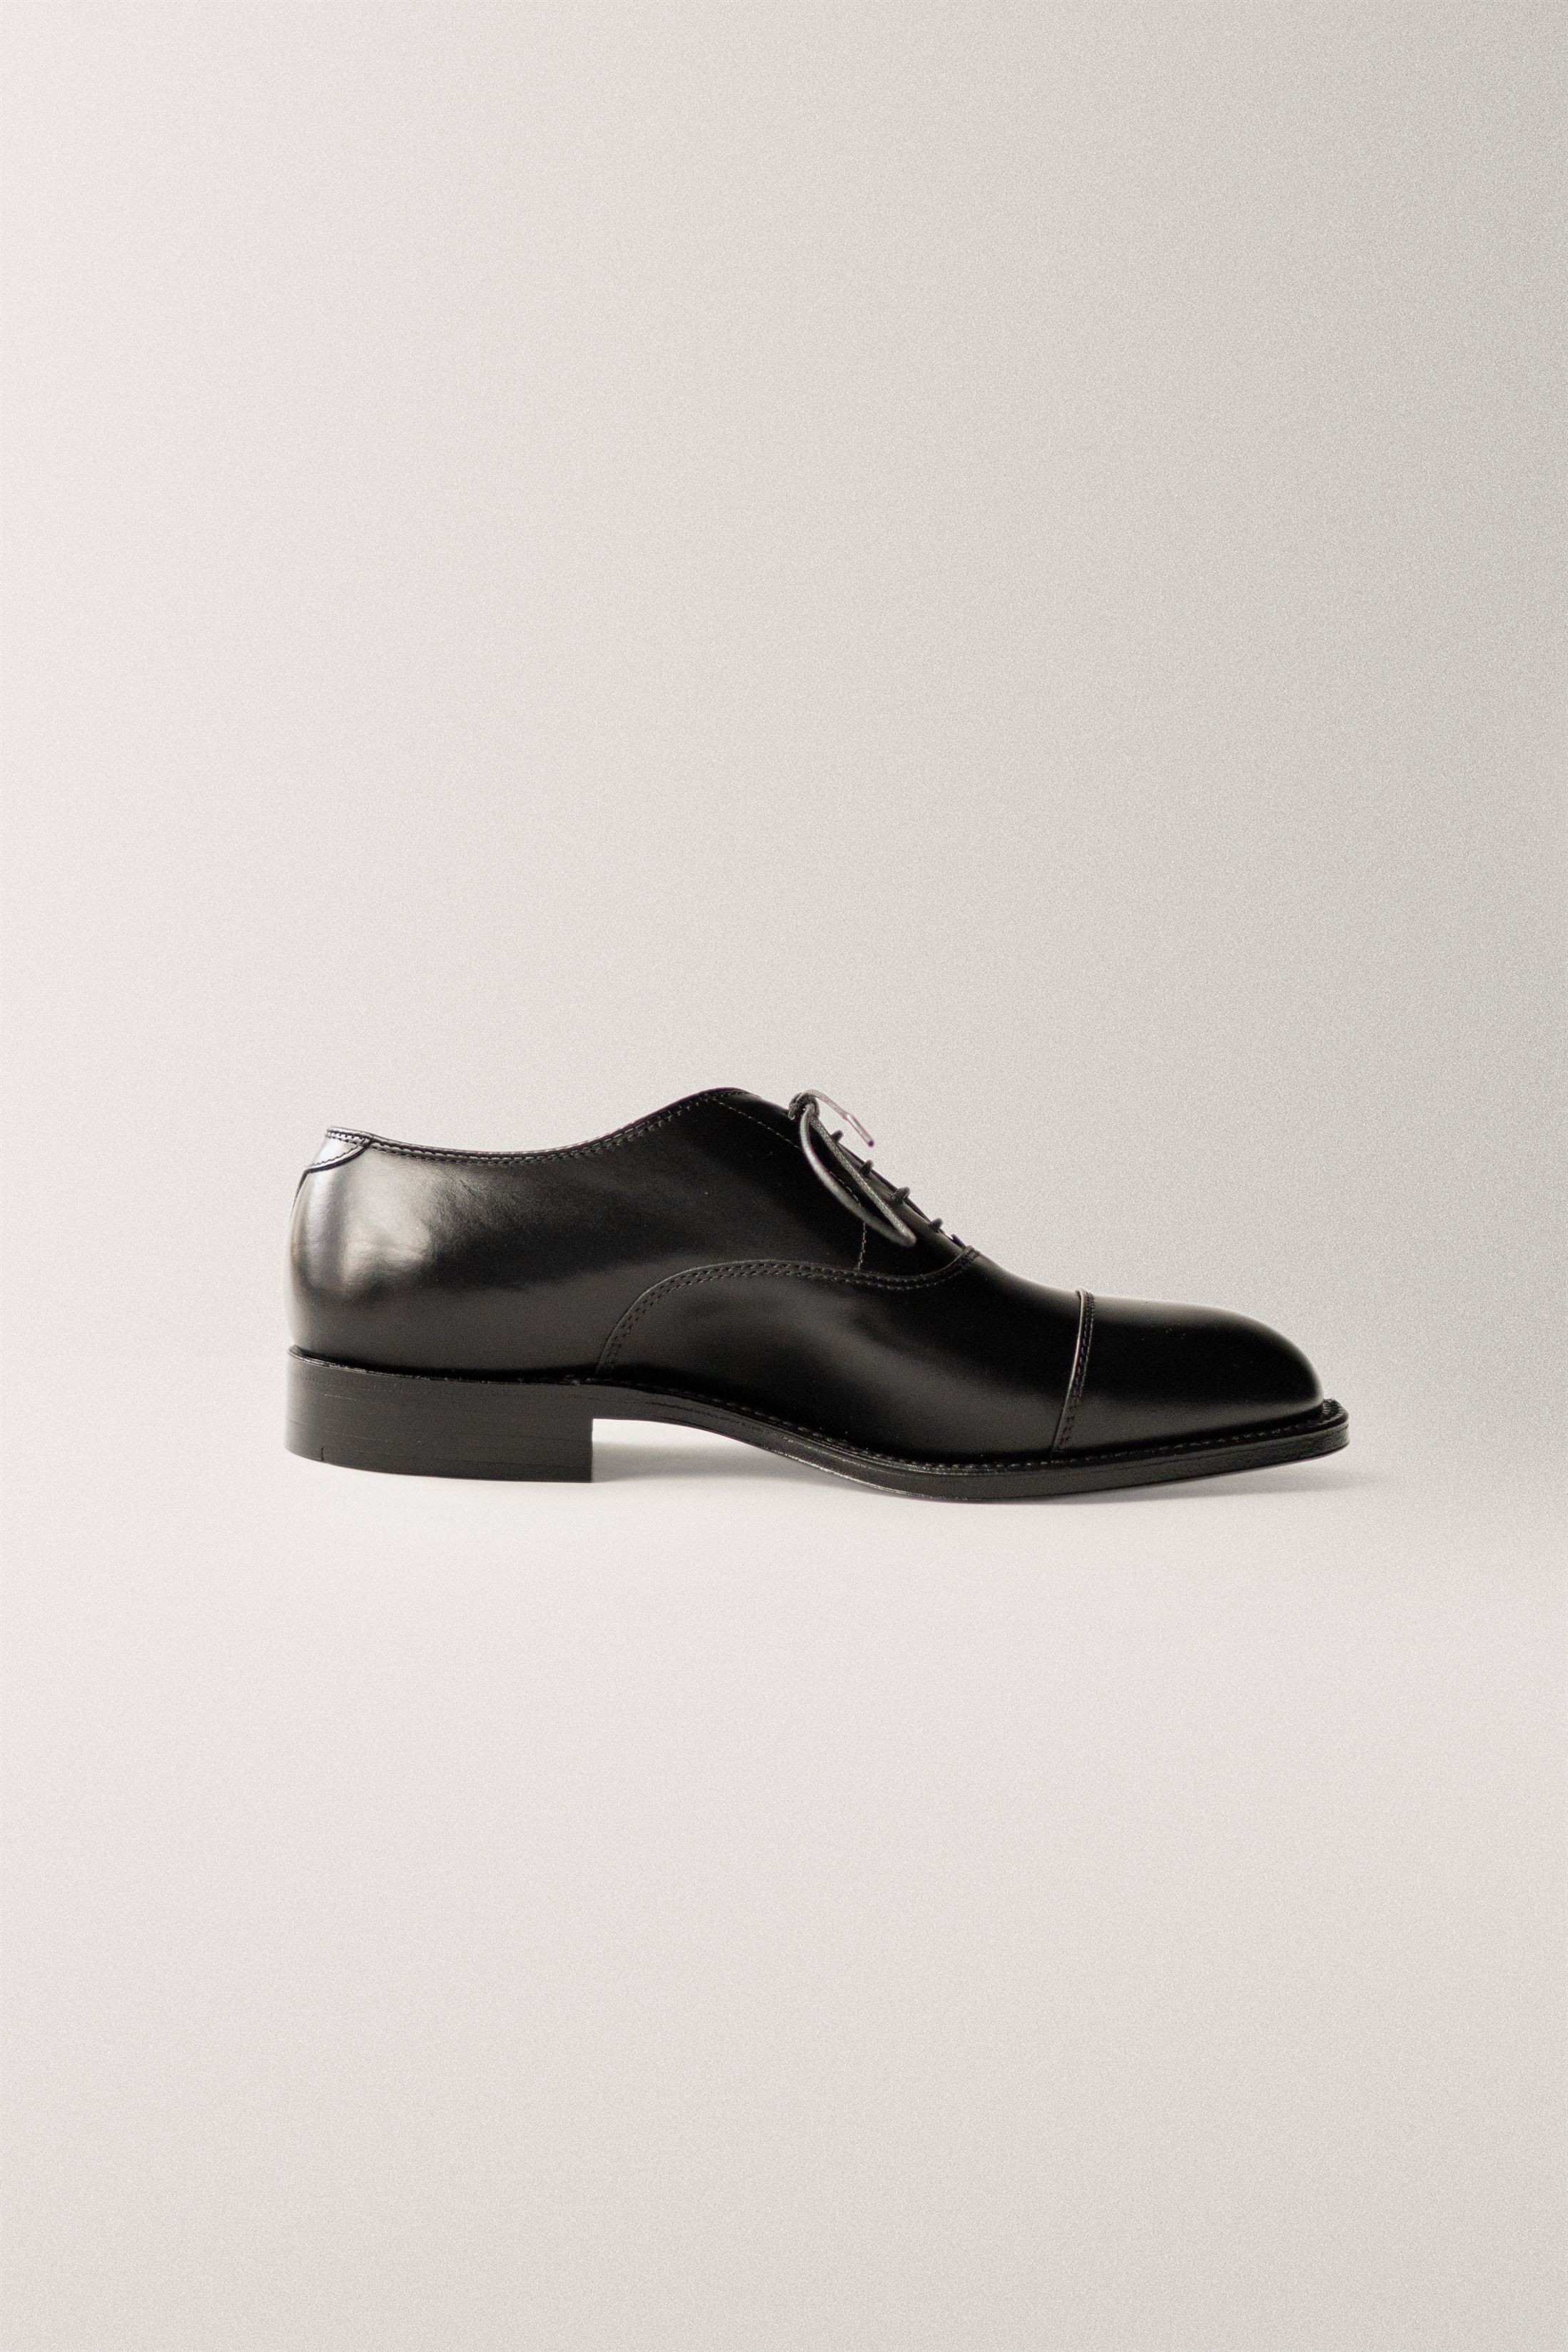 Straight Tip Balmoral Calf Skin | 907 - The Signet Store